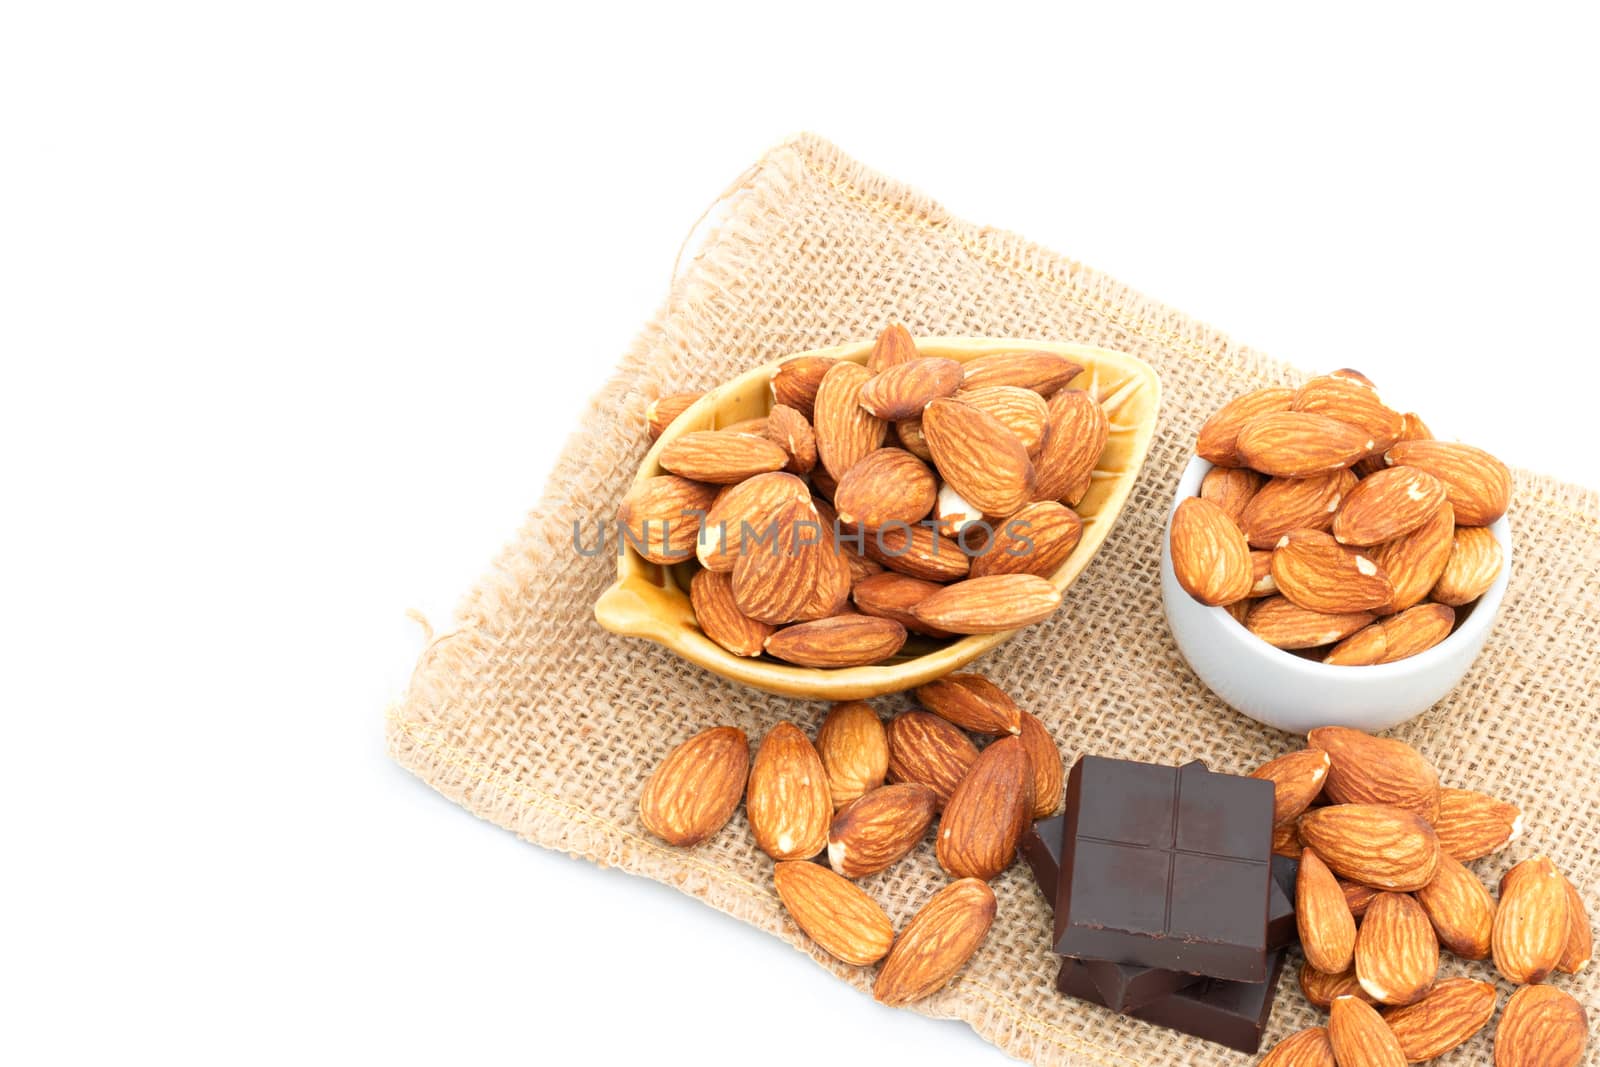 Chocolate and Almonds on a white background by sompongtom